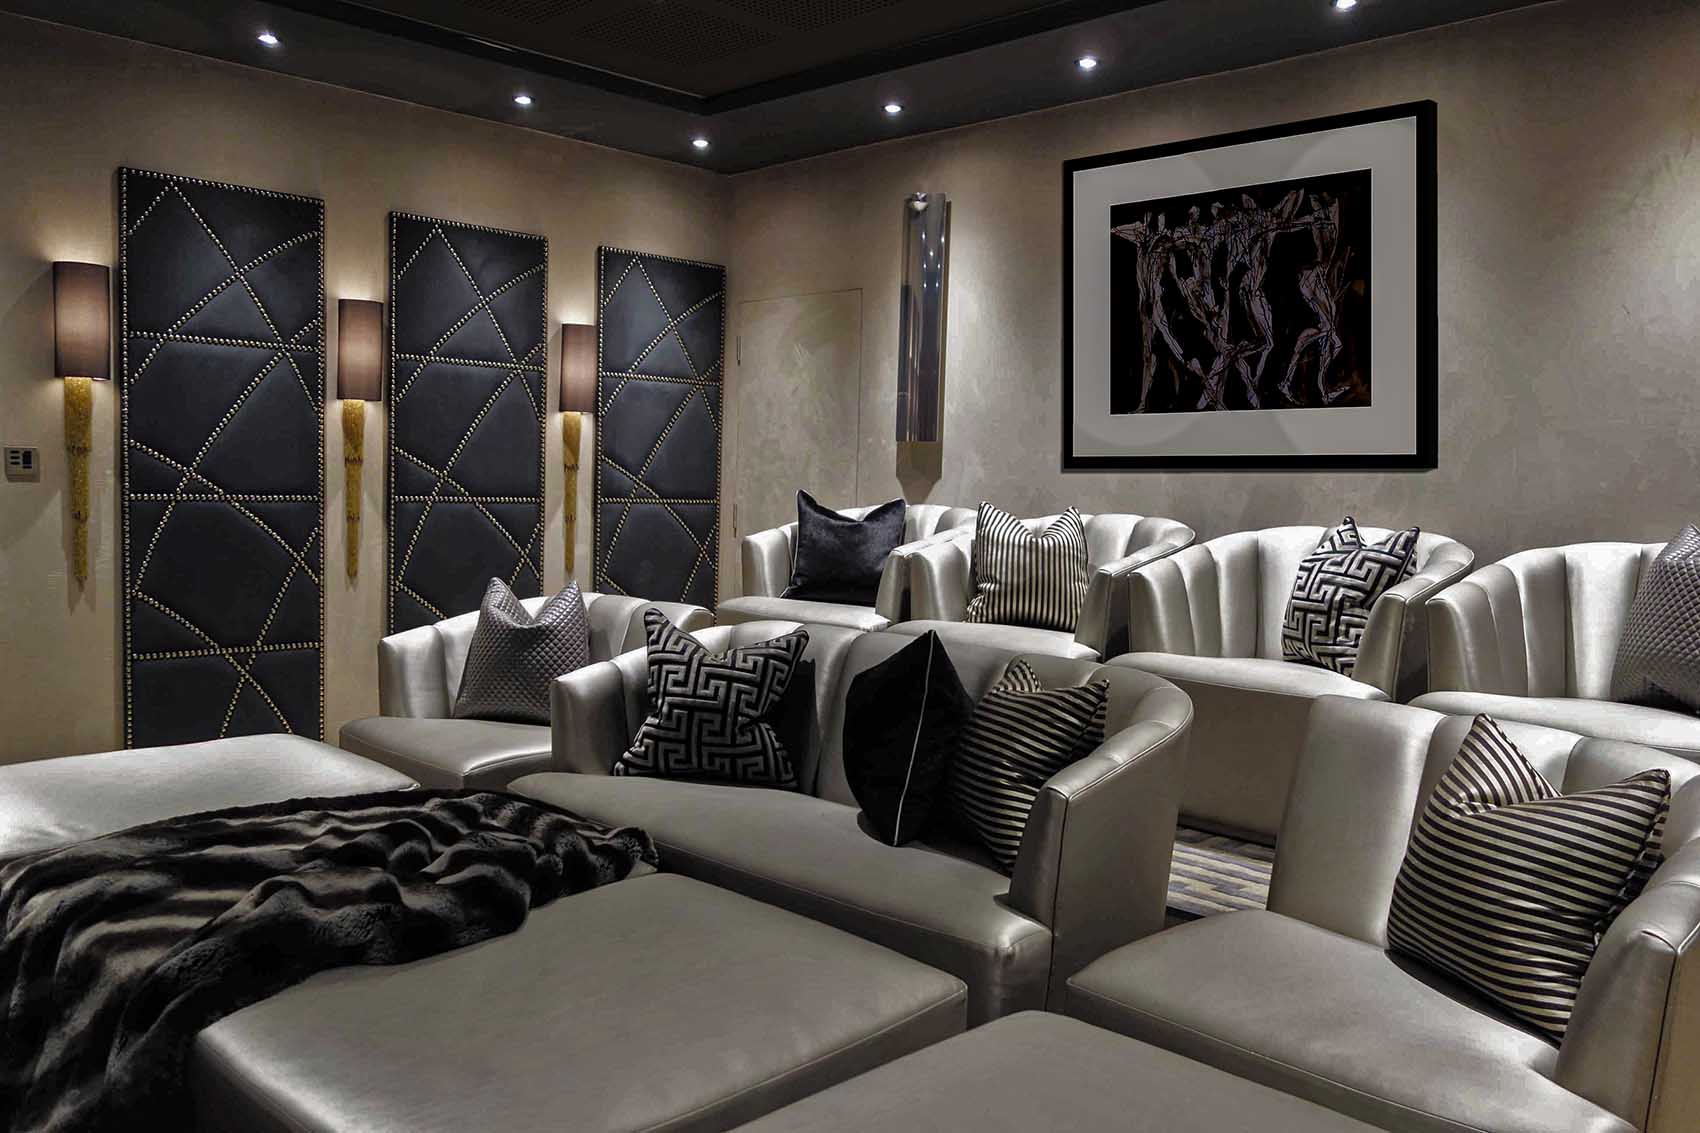 1930's inspired cinema room, suede walls, gold wall lights, gold leather chairs